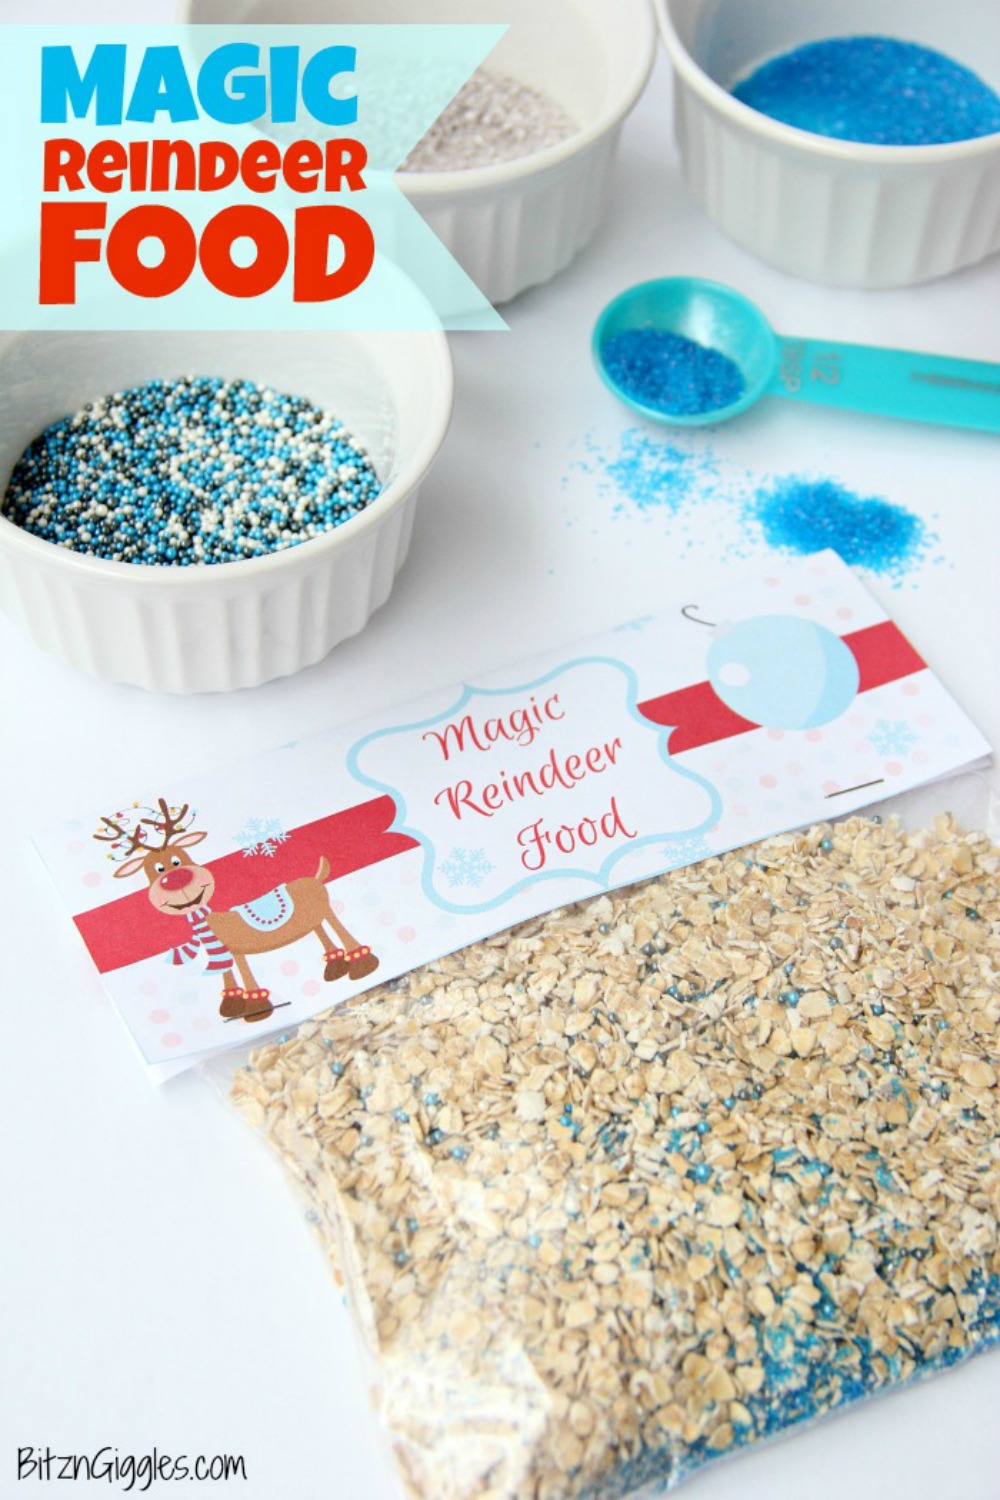 Magic Reindeer Food With Free Printable - Kids will love to sprinkle this Magic Reindeer Food in their yard to guide the reindeer to their home on Christmas Eve. Includes recipe + FREE printable bag topper! 